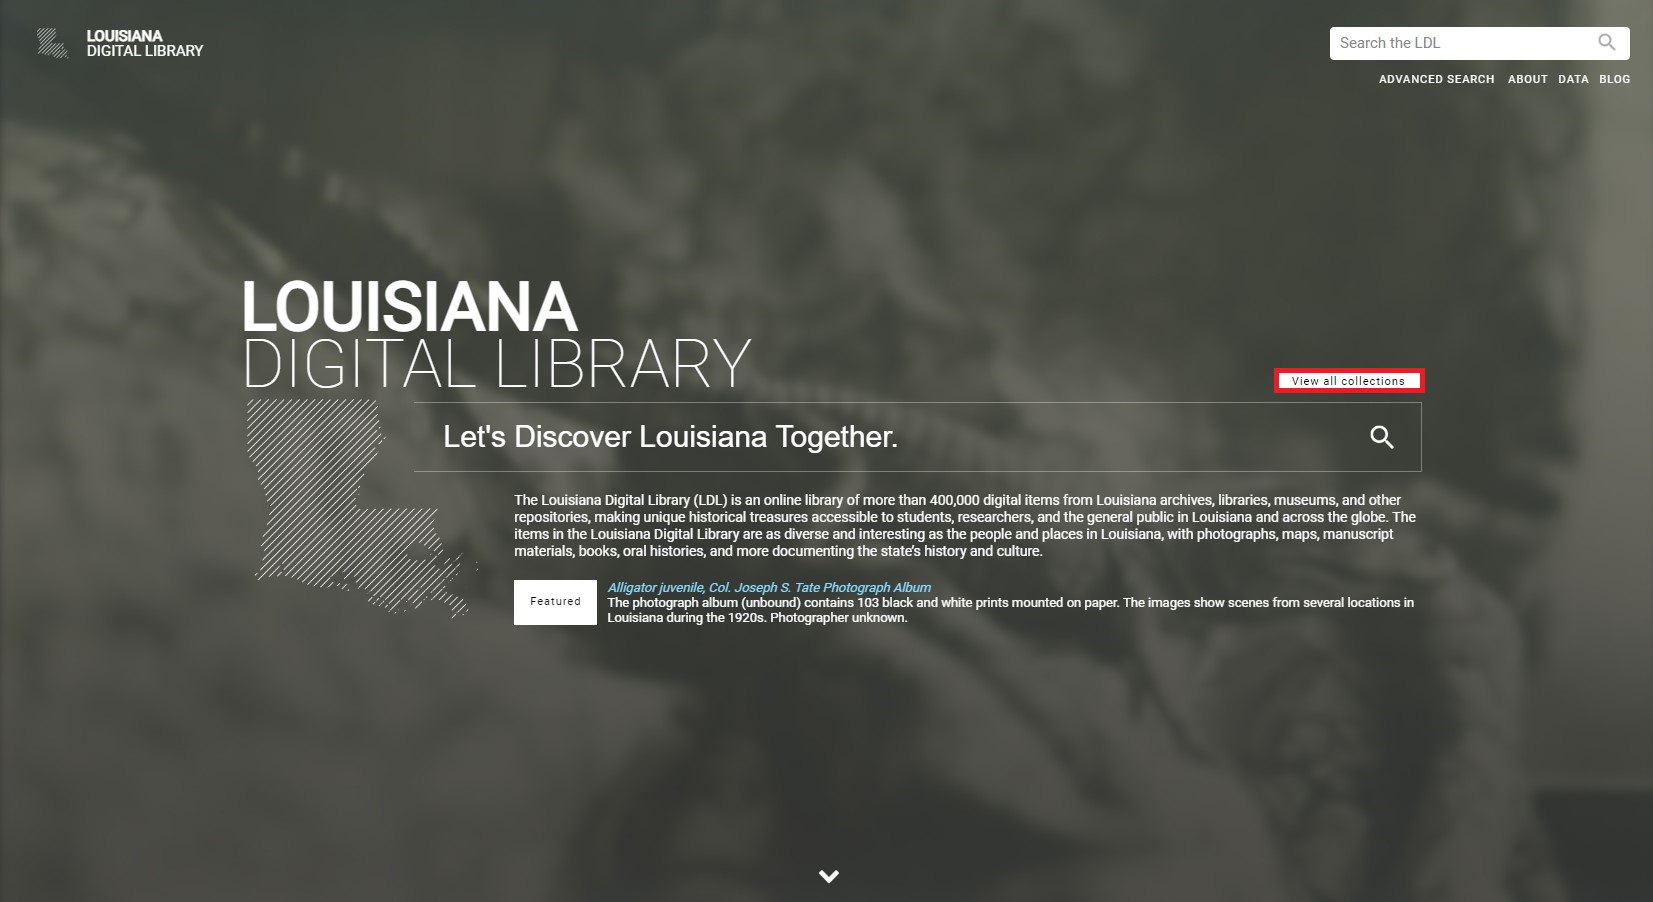 Louisiana Digital Library homepage with view all collections boxed